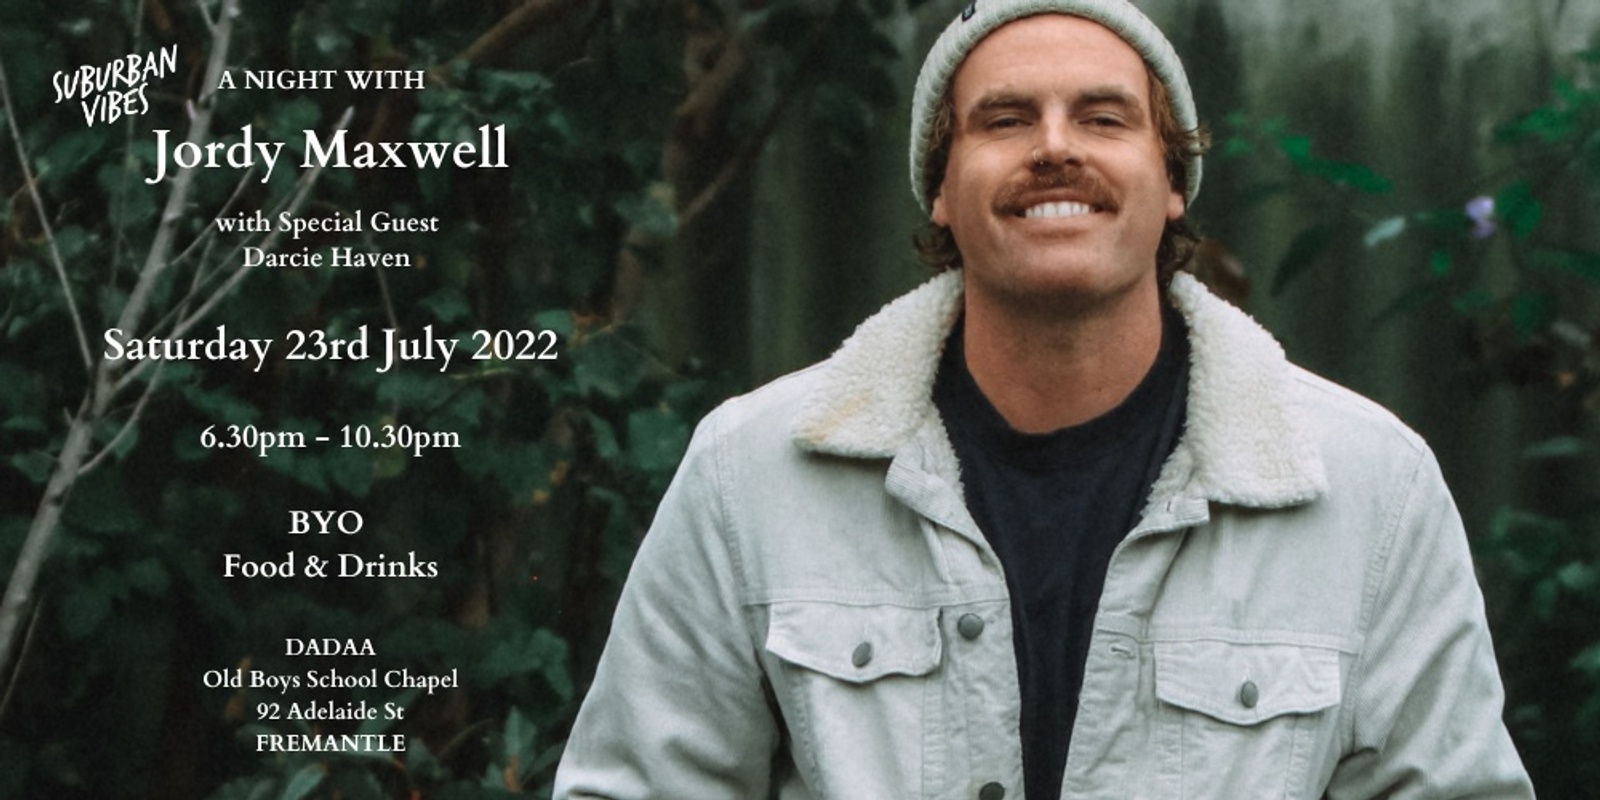 Banner image for Suburban Vibes presents "A night with Jordy Maxwell' with supports by Darcie Haven and Sam McGovern